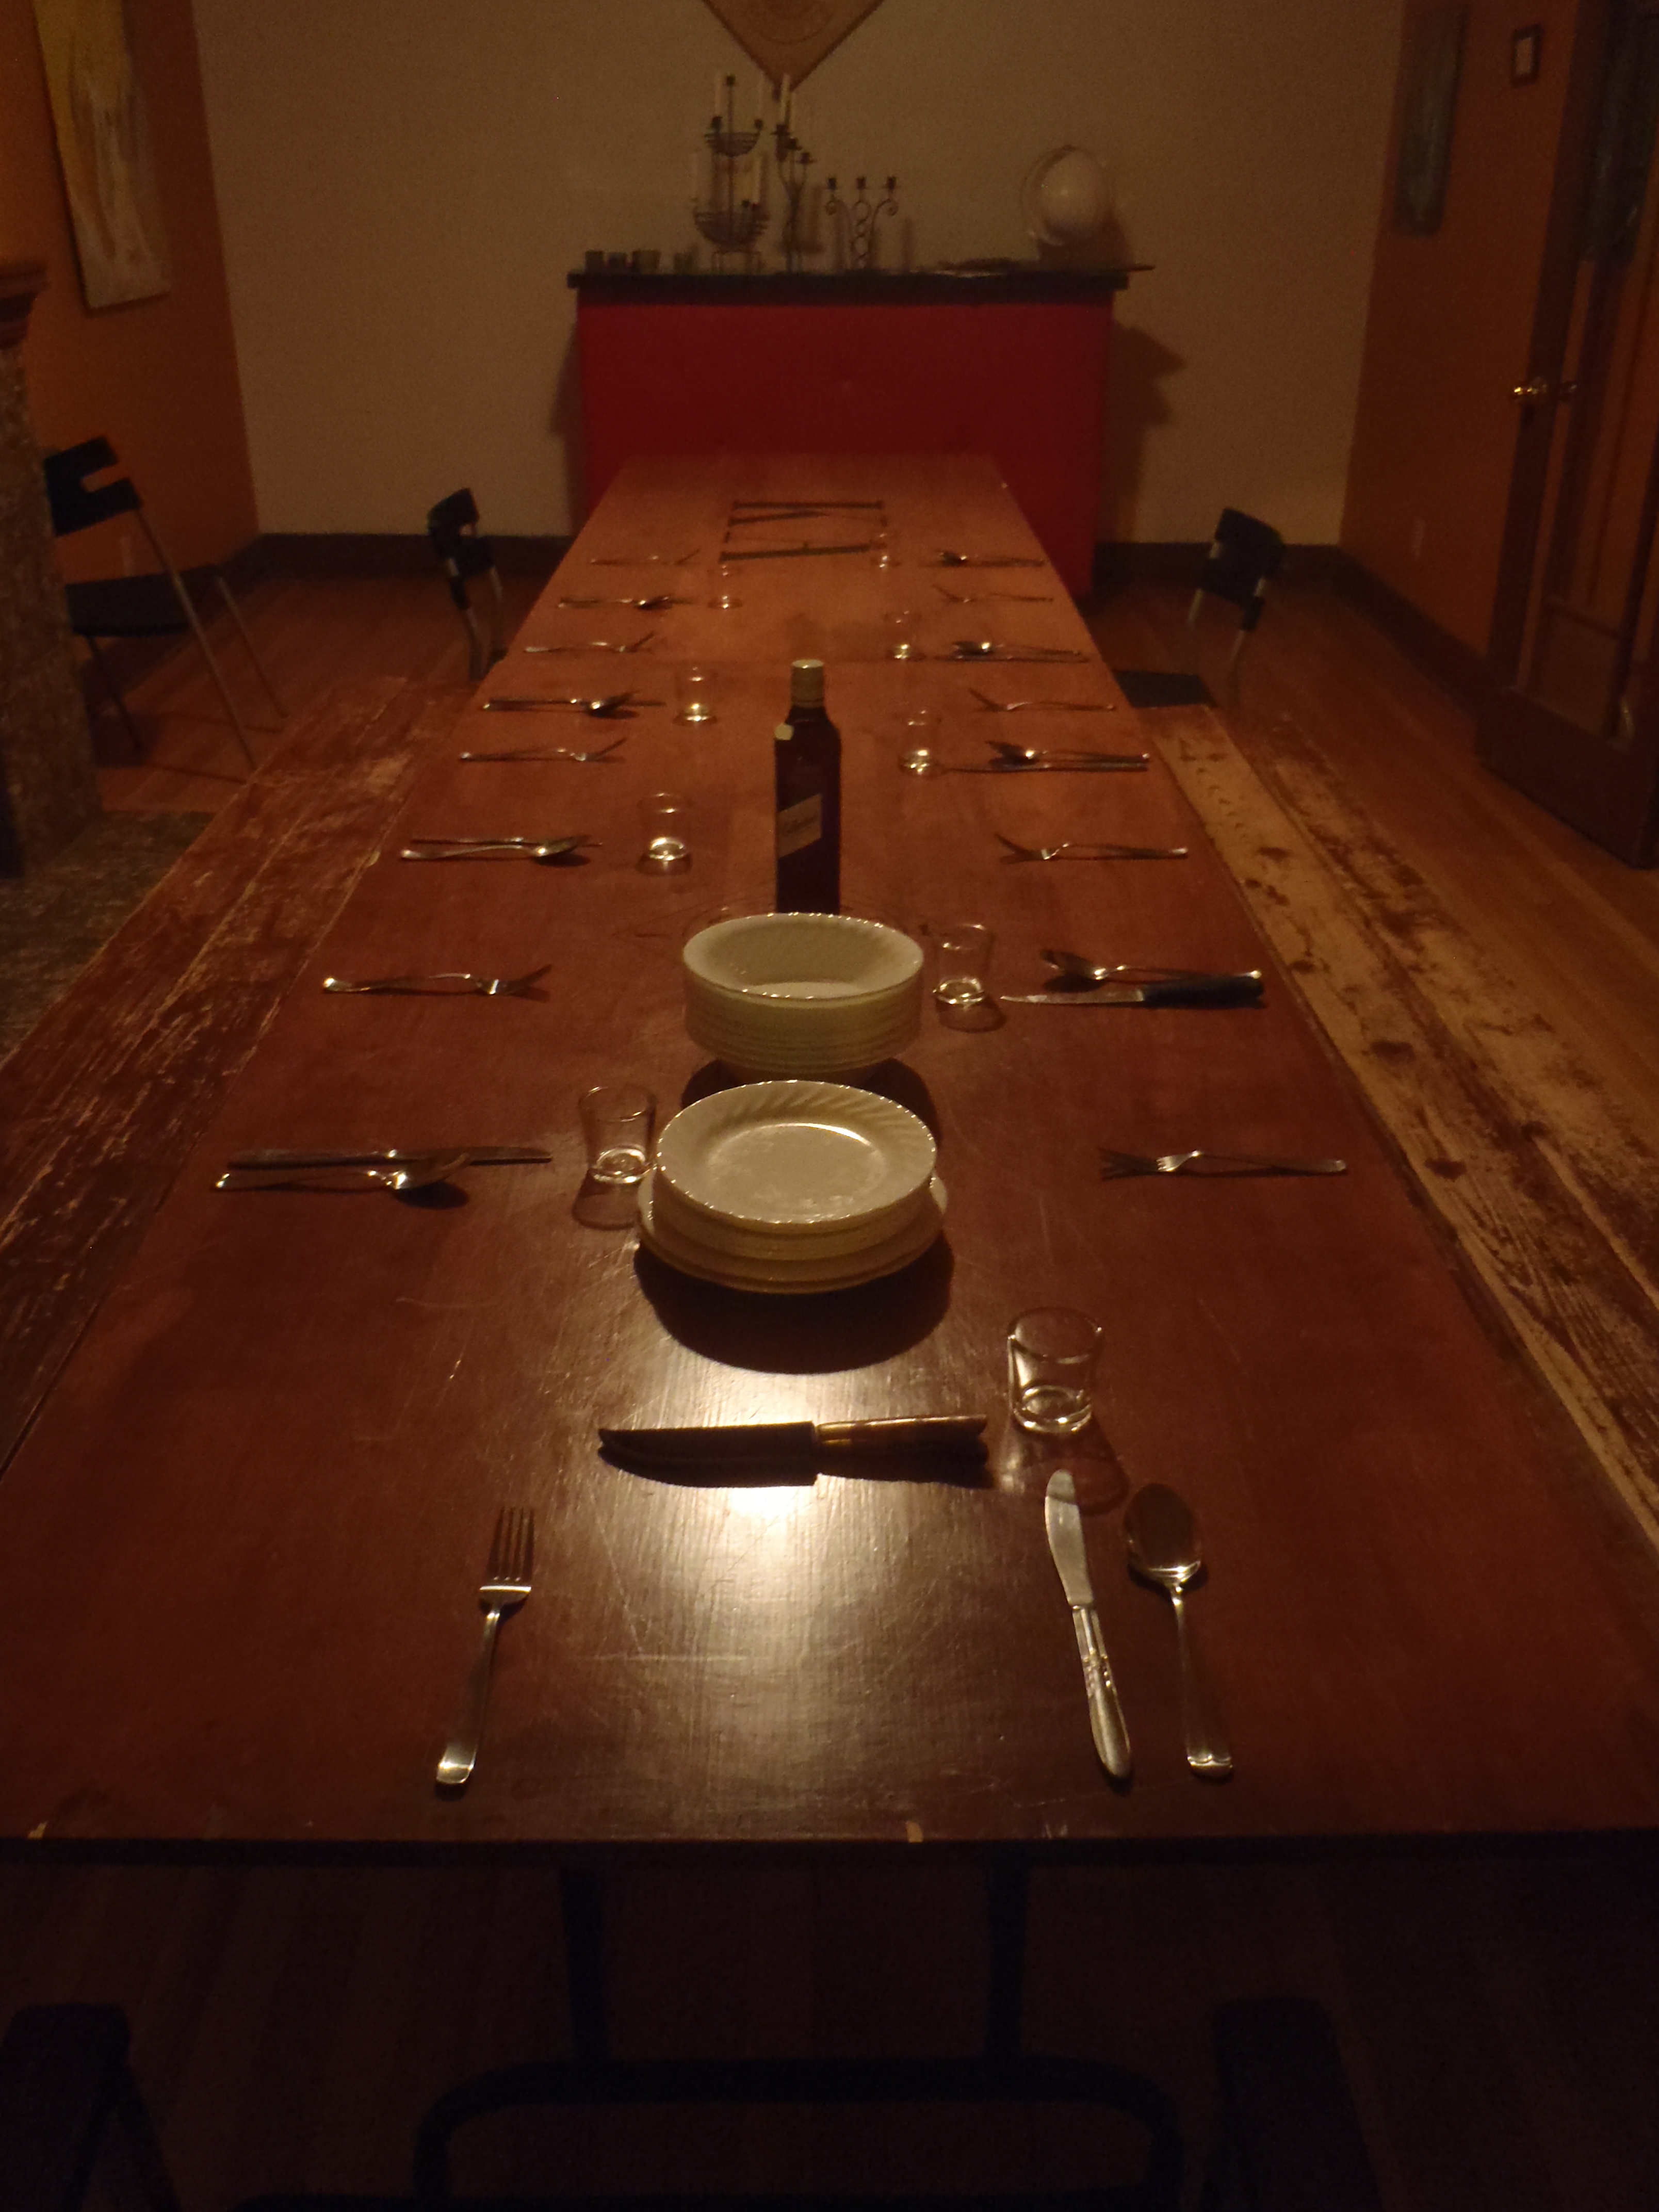 Table set for a Burns Supper at the Kappa Alpha house on the U of A campus